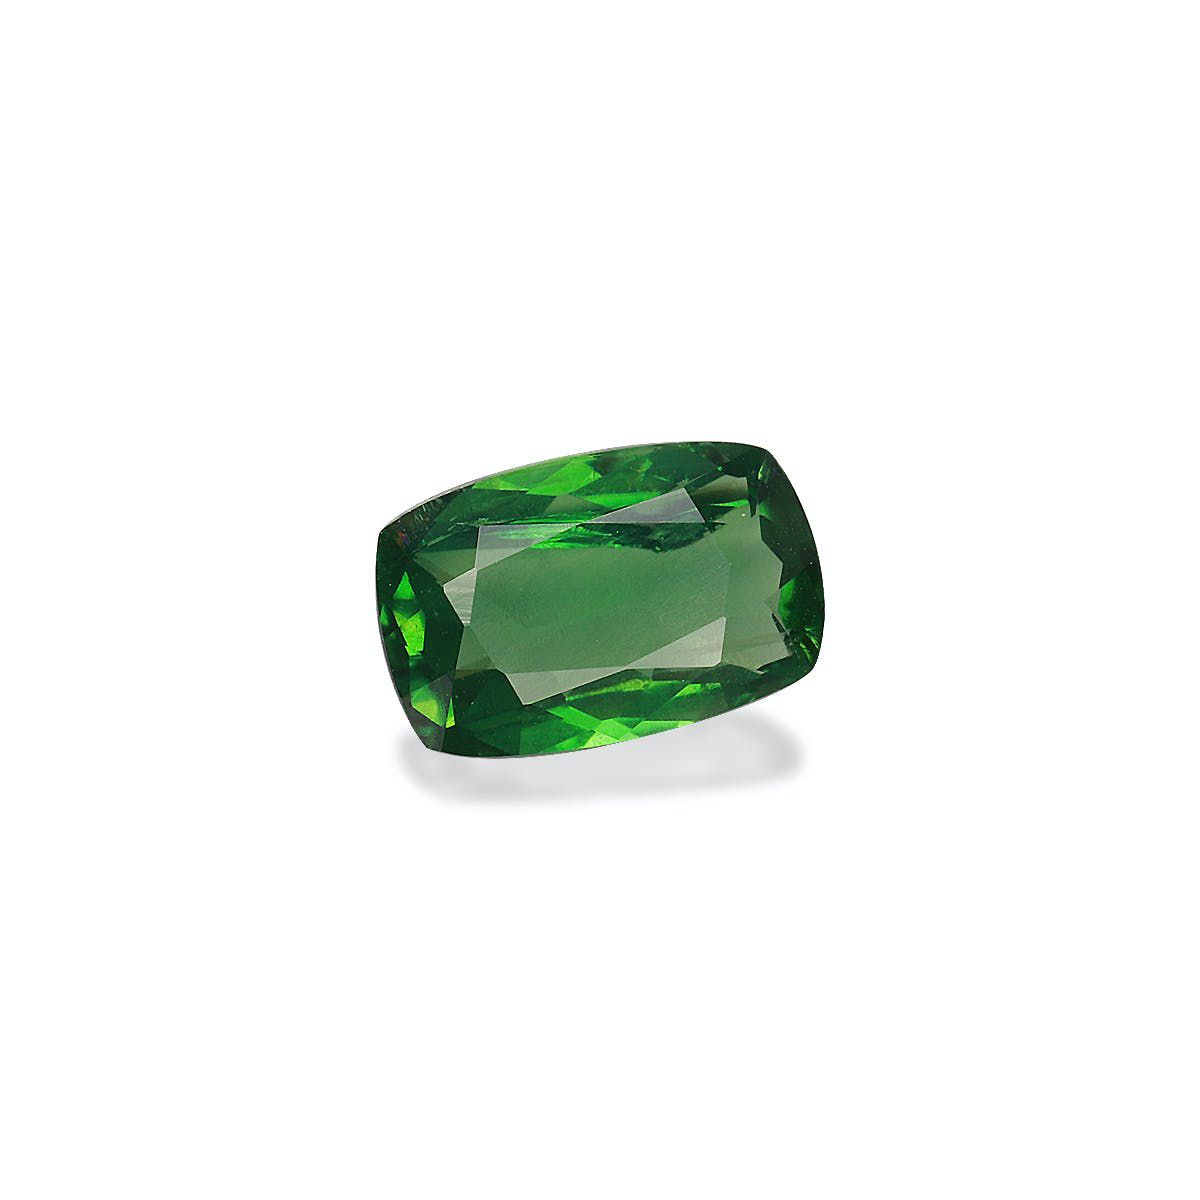 Picture of Basil Green Chrome Tourmaline 0.78ct - 7x5mm (CT0106)